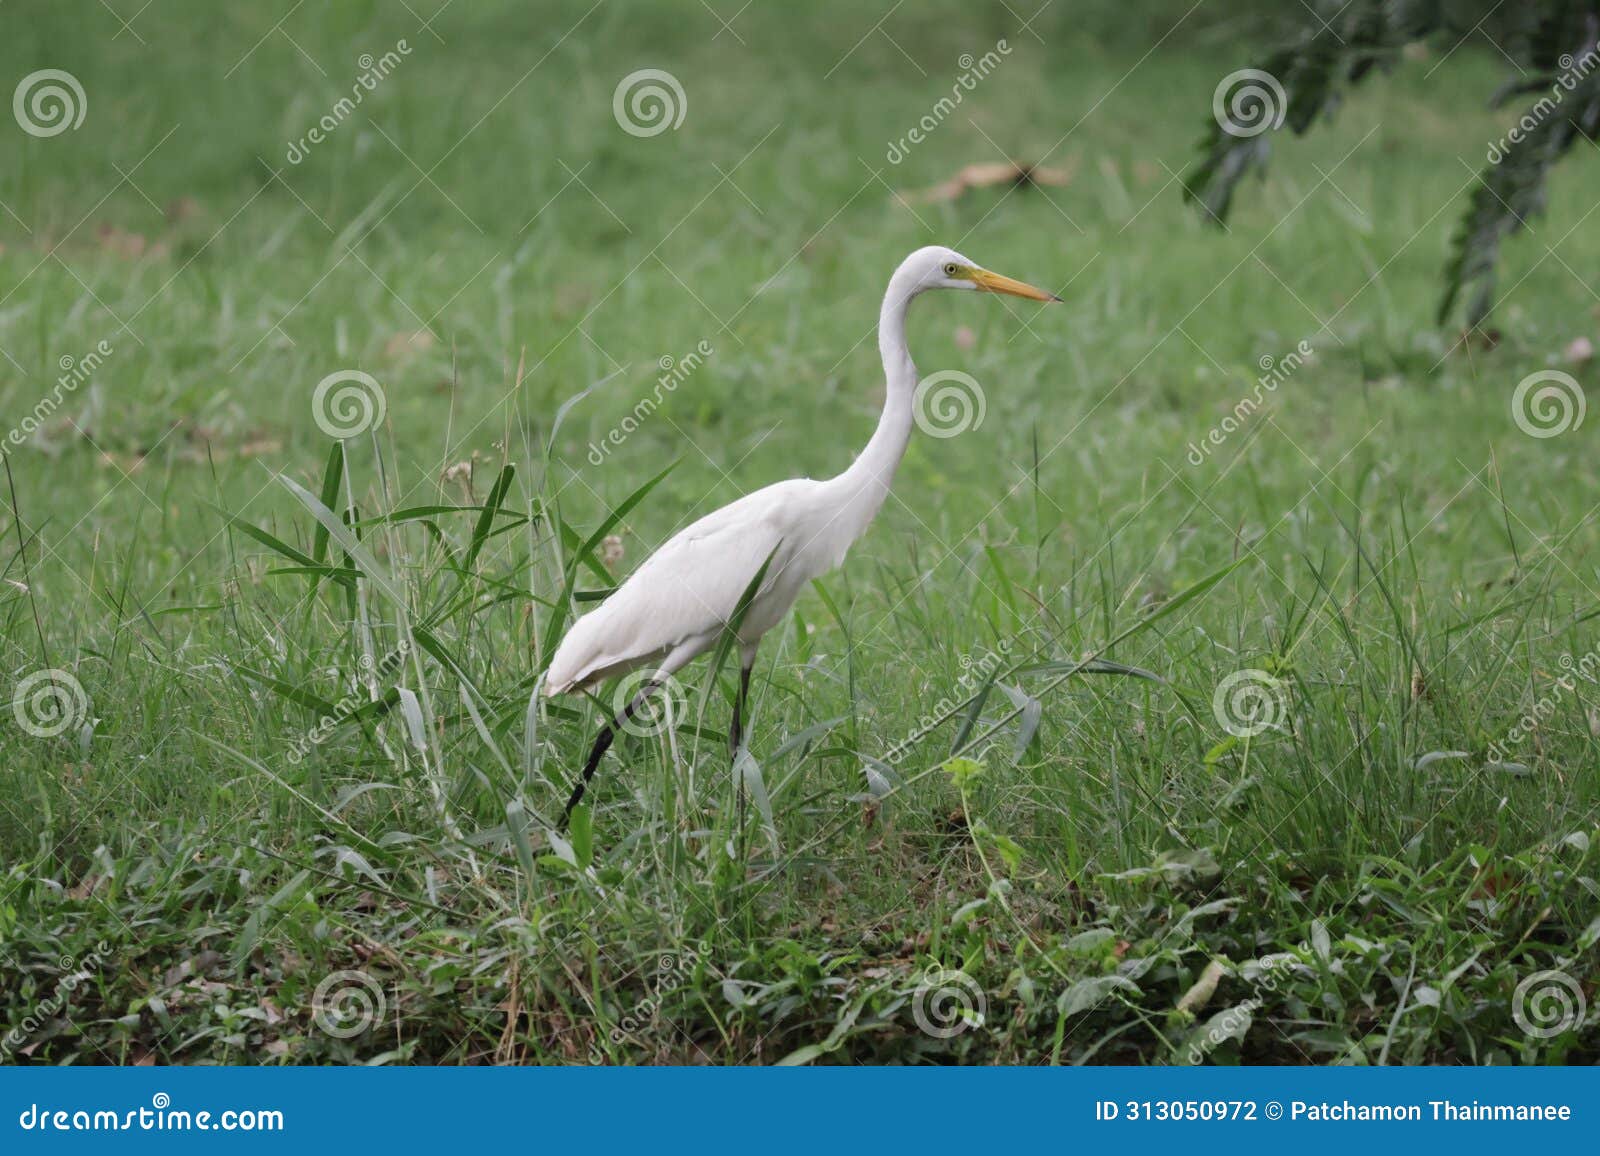 egret is a bird in the family. classified as a pelican, it uses the genus ardeidae.